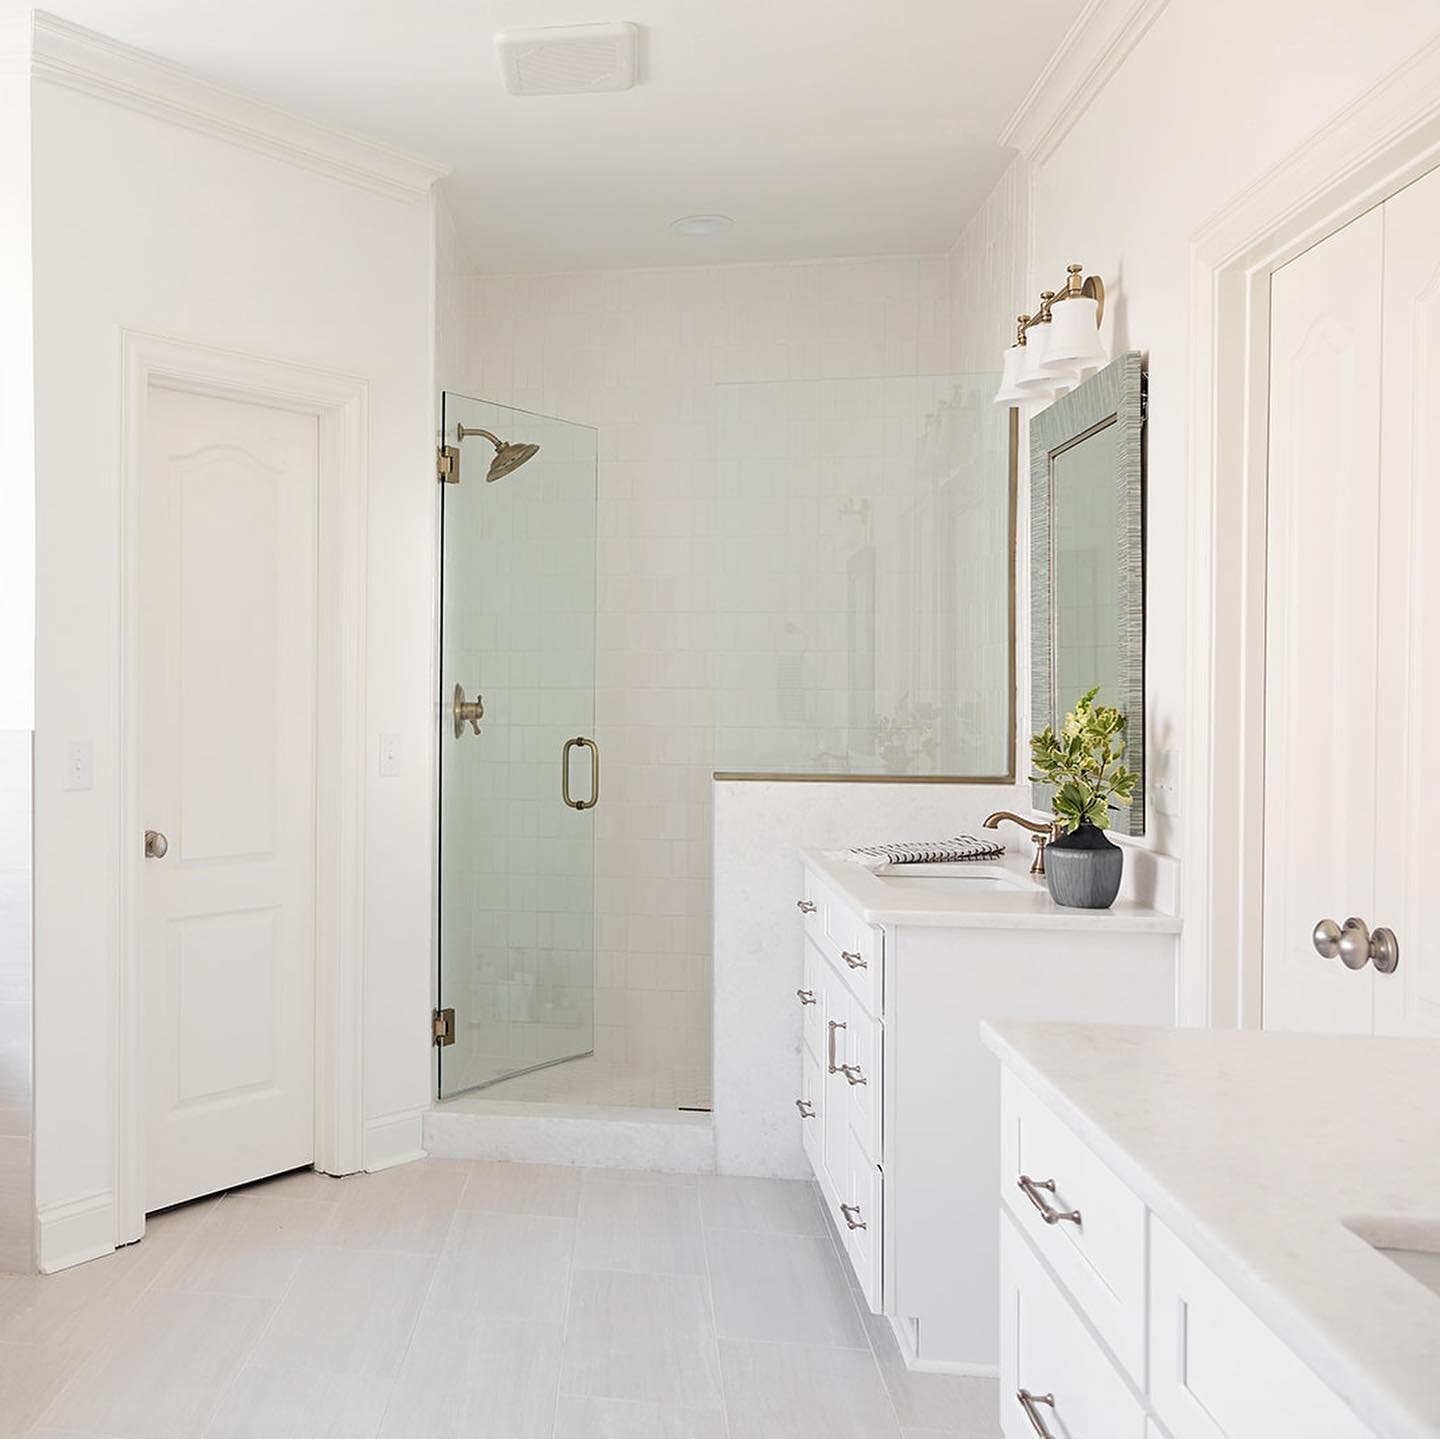 Another before and after for you. Another dark dated master bath turned light and bright. Photo by @kmosleyphotography